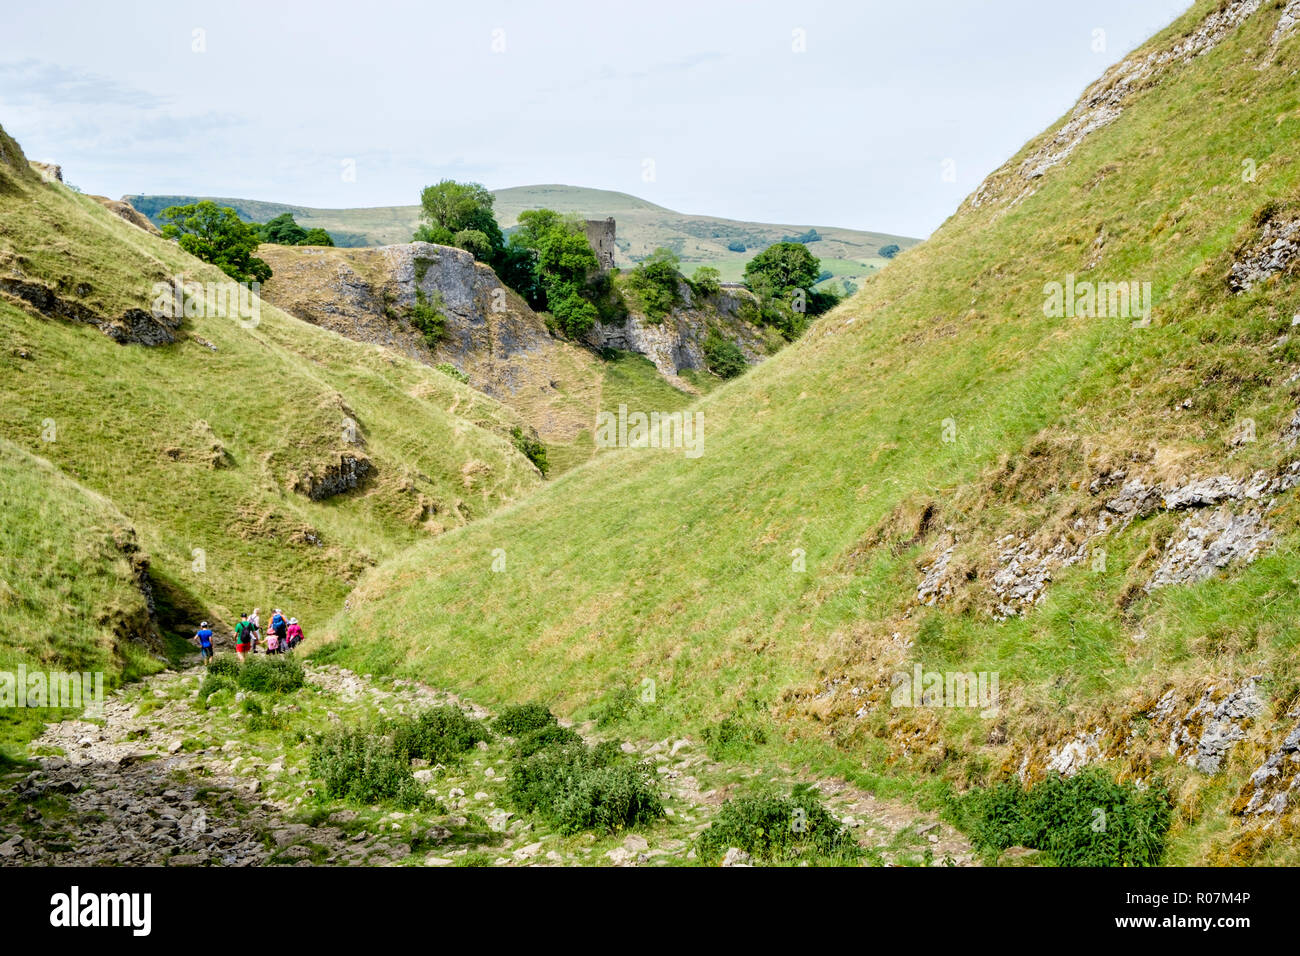 Walkers descending the stony path of Limestone Way in Cave Dale, with Peveril Castle in the distance, Derbyshire, Peak District, England, UK Stock Photo